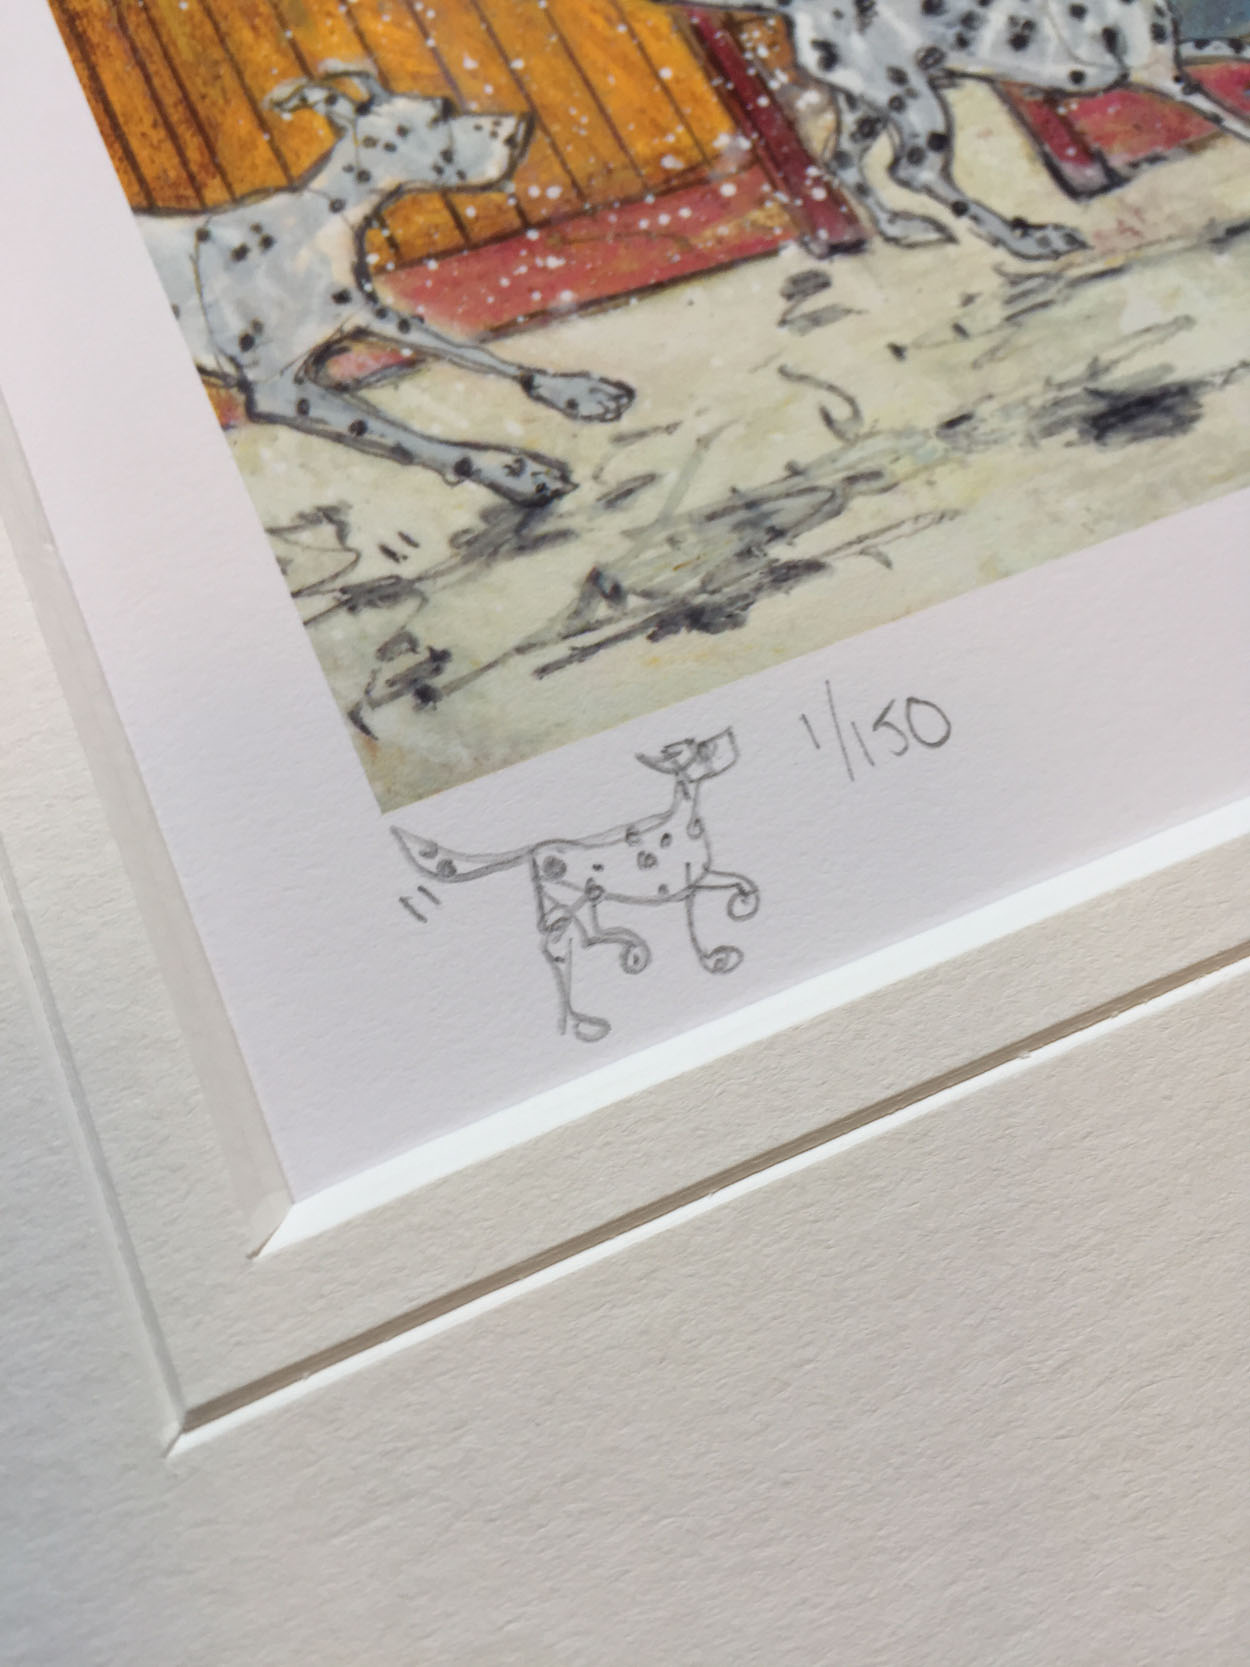 Spots 'n Flakes (Remarque) (1/150) by Sam Toft, Dog | Animals | Rare | Humour | Figurative